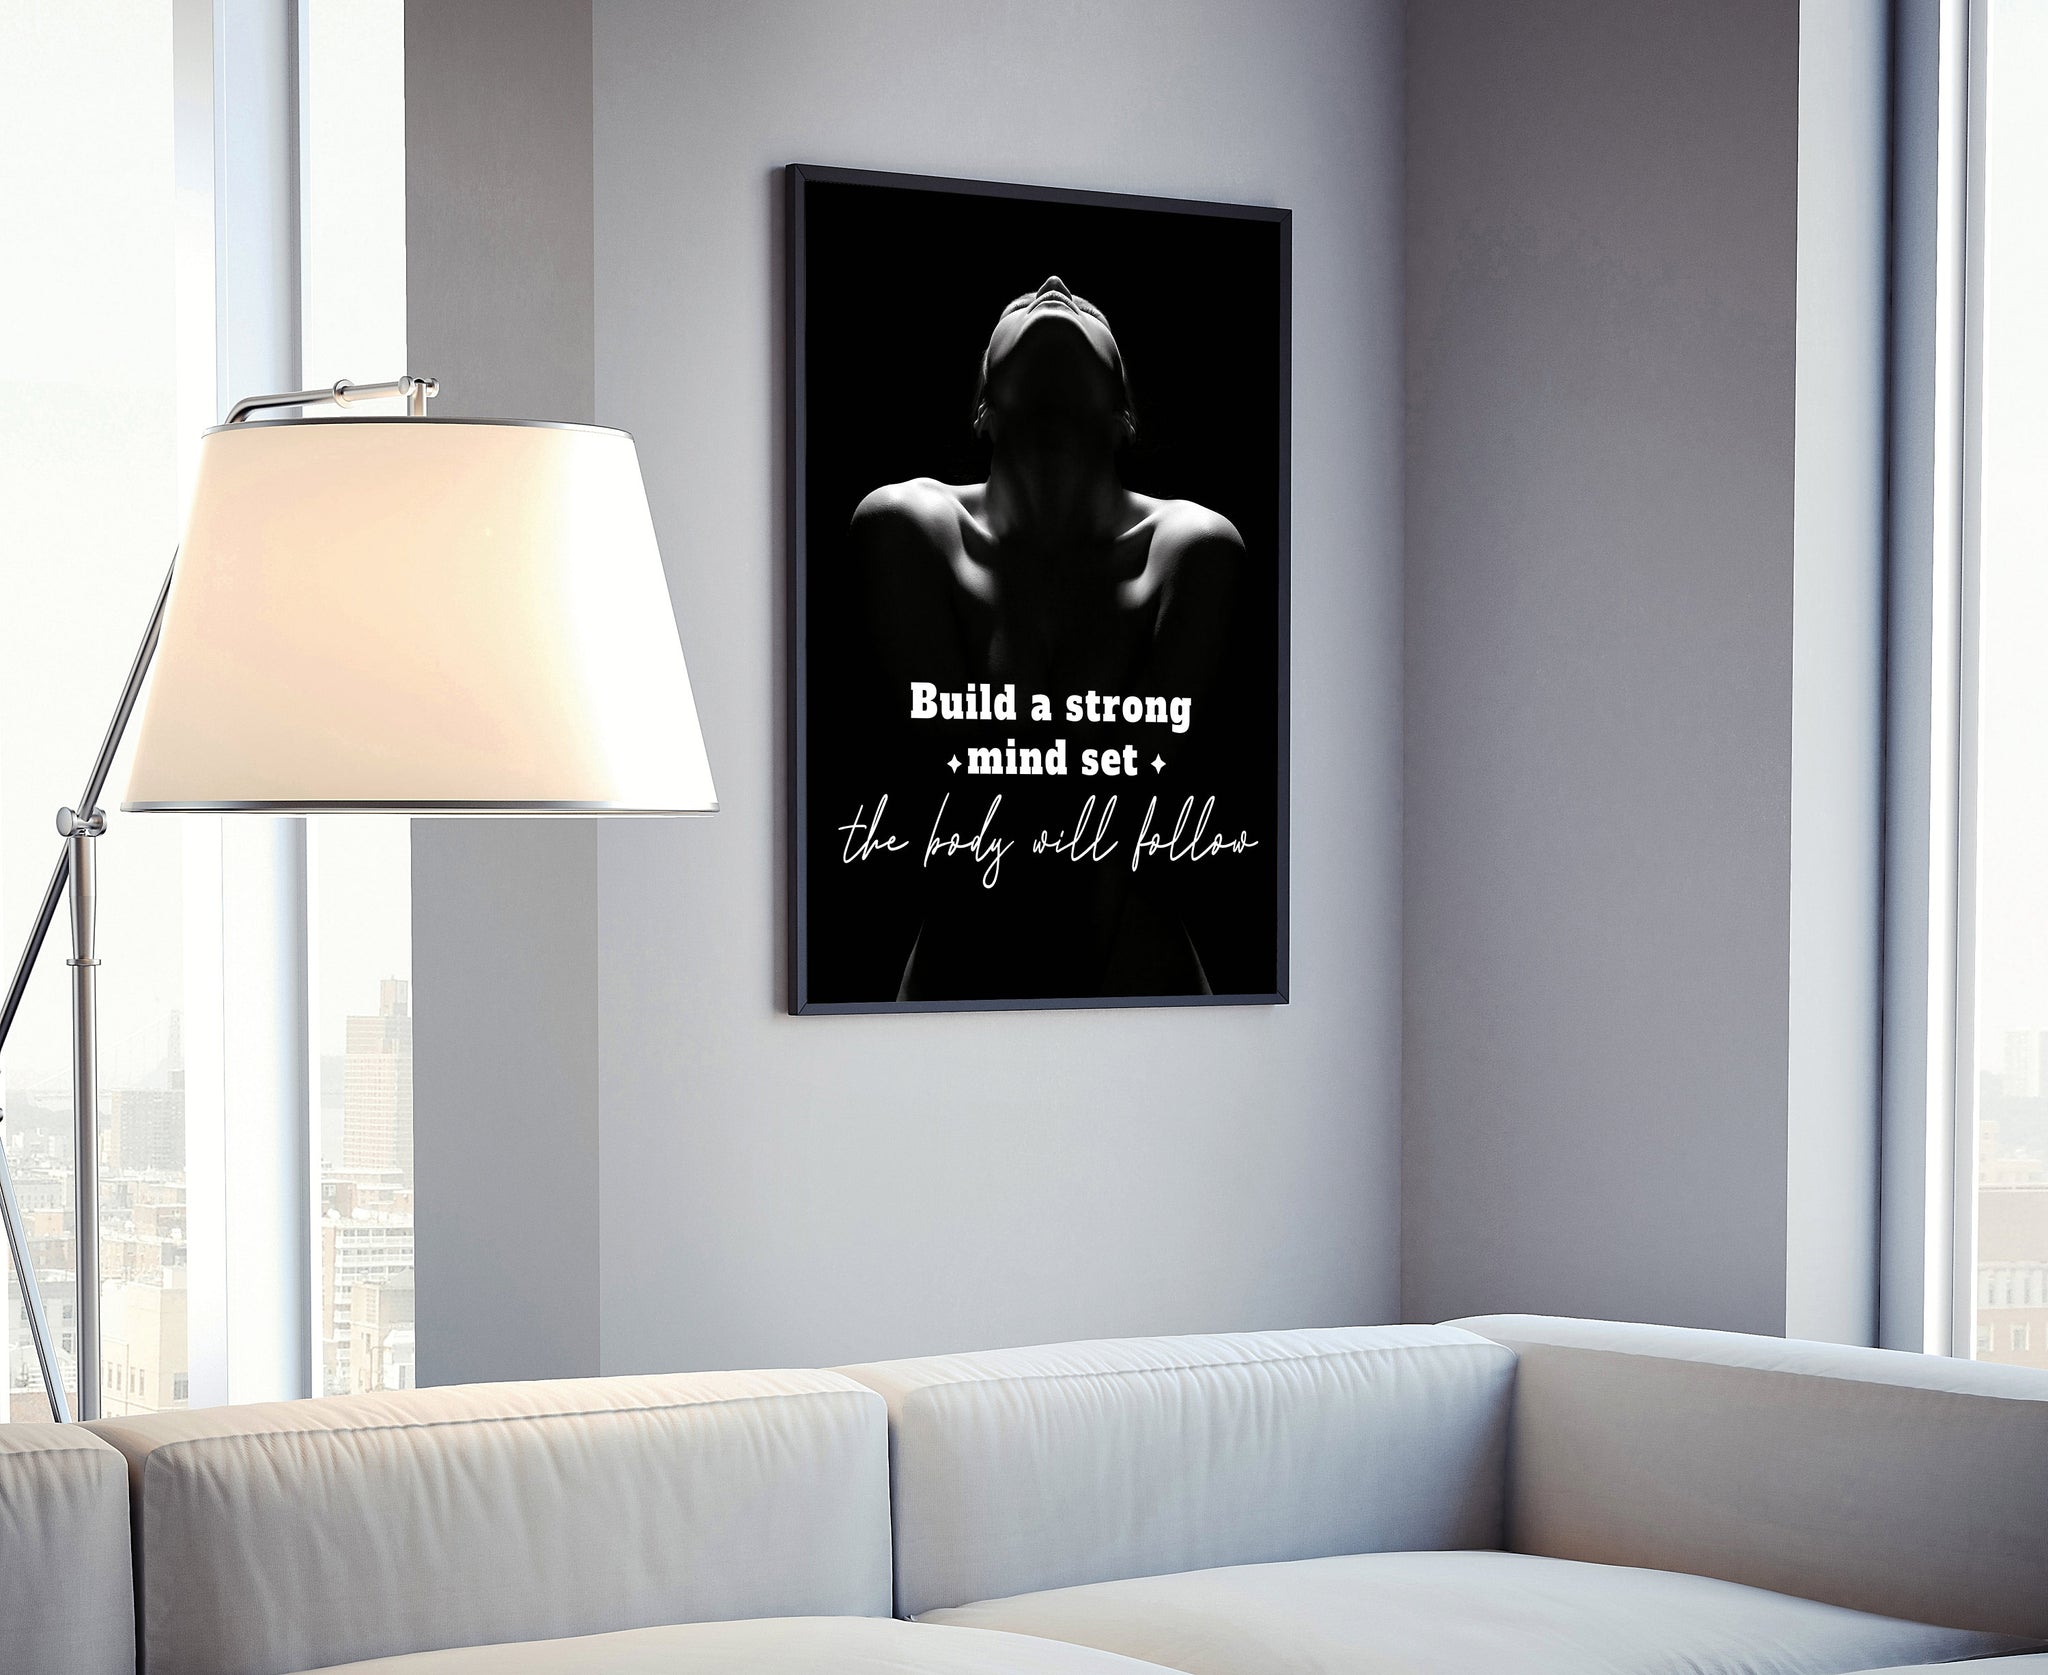 Gym wall art, Gym Poster, Gym quote, Gym Décor, Home gym, Home gym décor, Home gym poster, Inspired poster, Fitness décor,Motivational quote